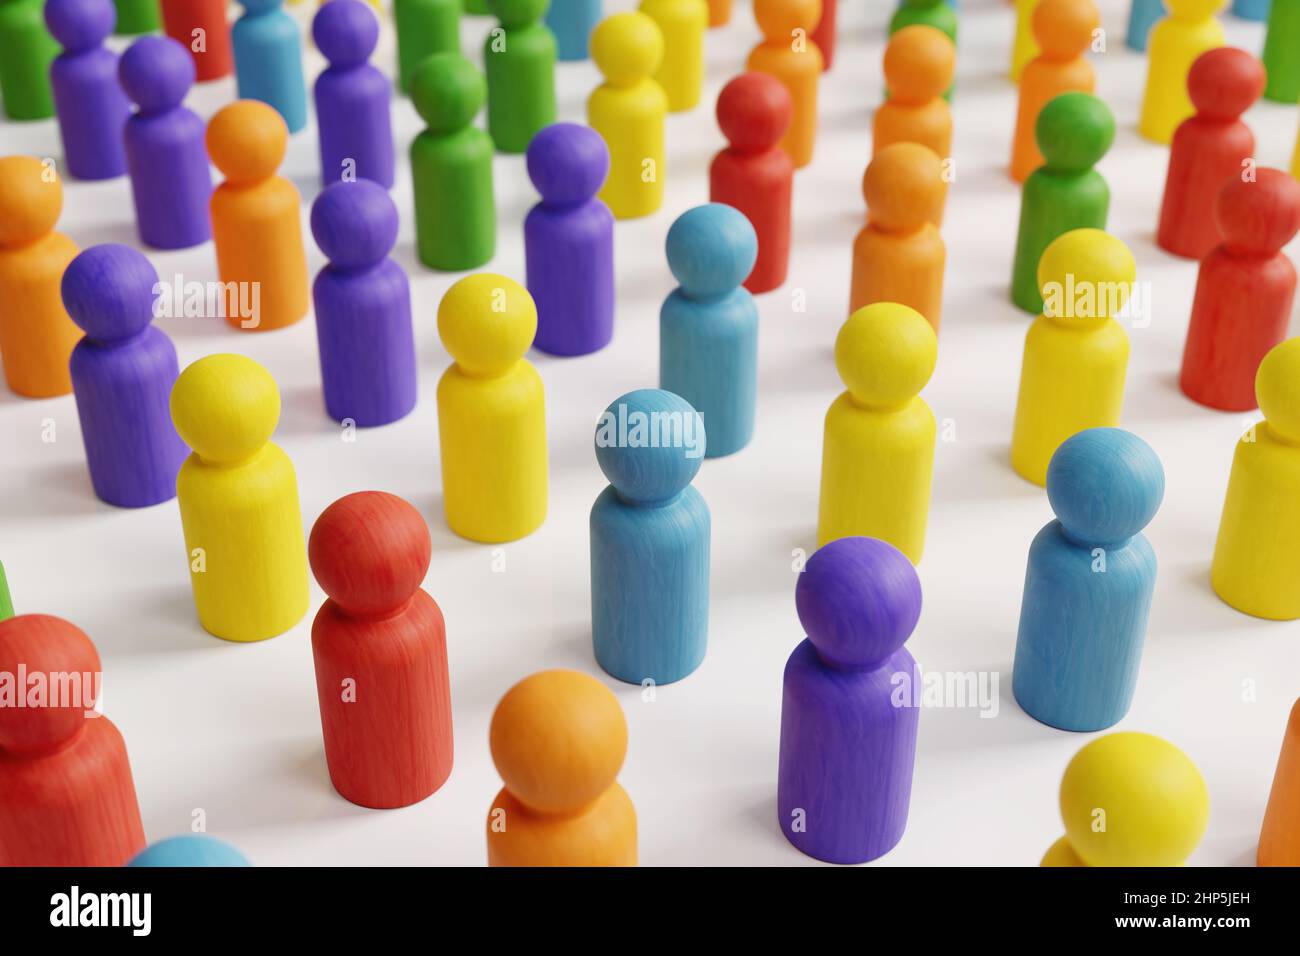 Diversity, Equality and Representation Concept. Wooden Doll Figures in Different Shades. 3D Render. Stock Photo